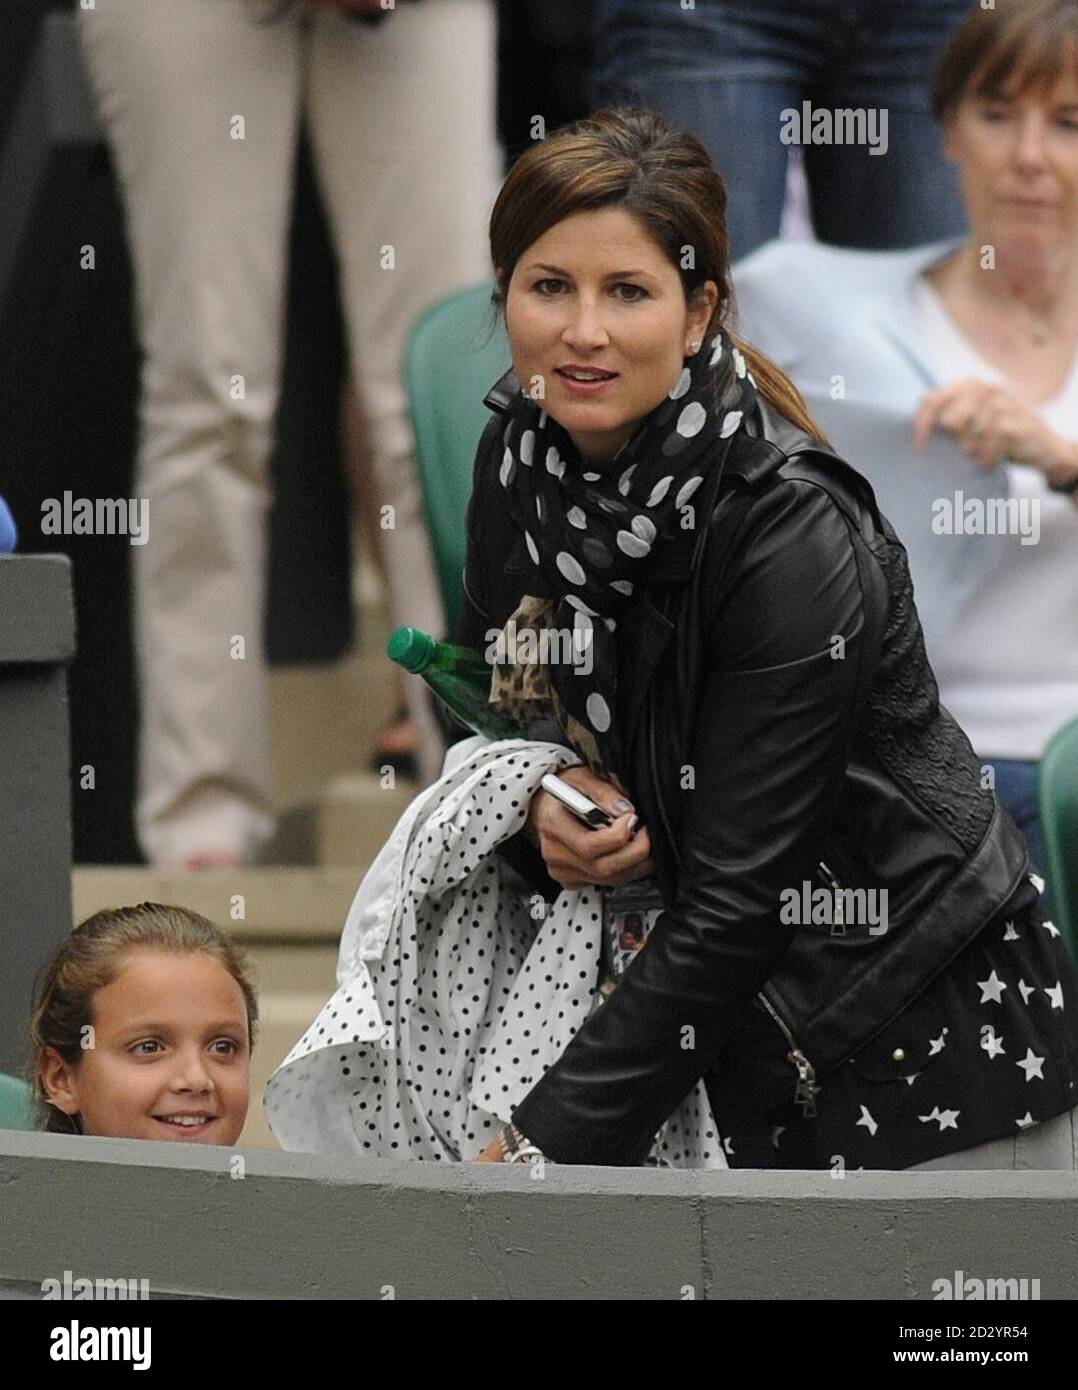 Mirka Vavrinec, wife of Switzerland's Roger Federer arrives to watch his match on Centre Court during day four of the 2011 Wimbledon Championships at the All England Lawn Tennis and Croquet Club, Wimbledon. Stock Photo